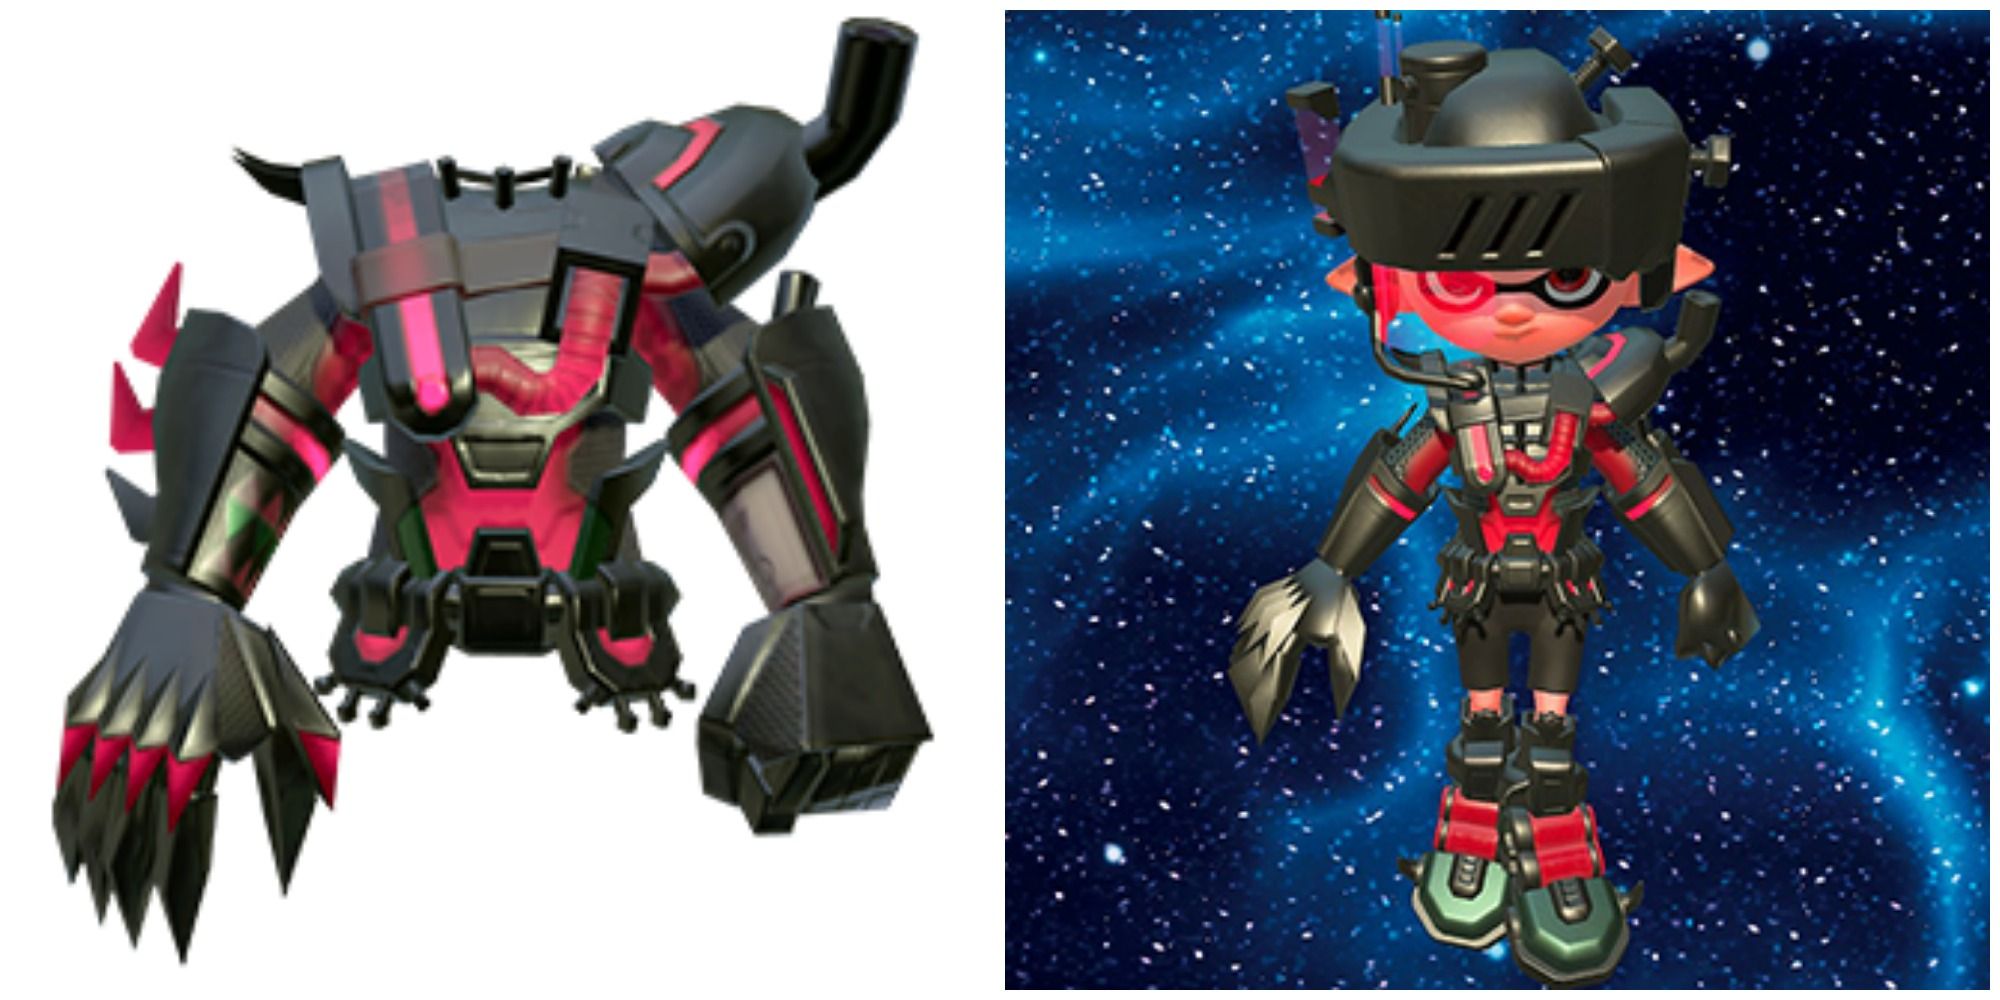 Split image of Mecha Body clothing from Splatoon 2, and an Inkling Boy wearing Mecha Body clothing and helmet with a space background